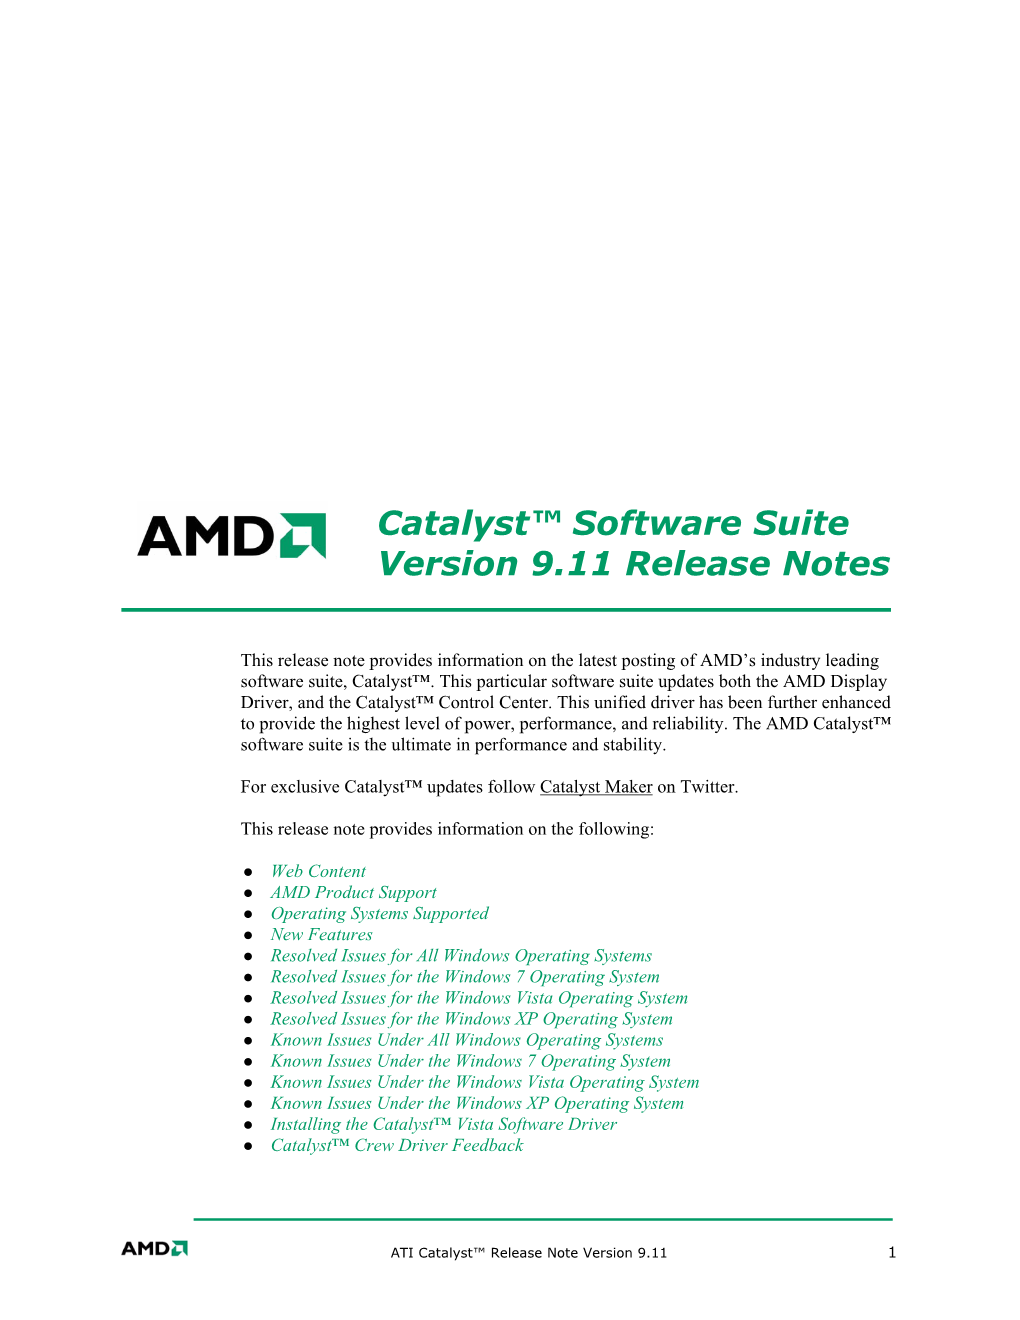 Catalyst™ Software Suite Version 9.11 Release Notes